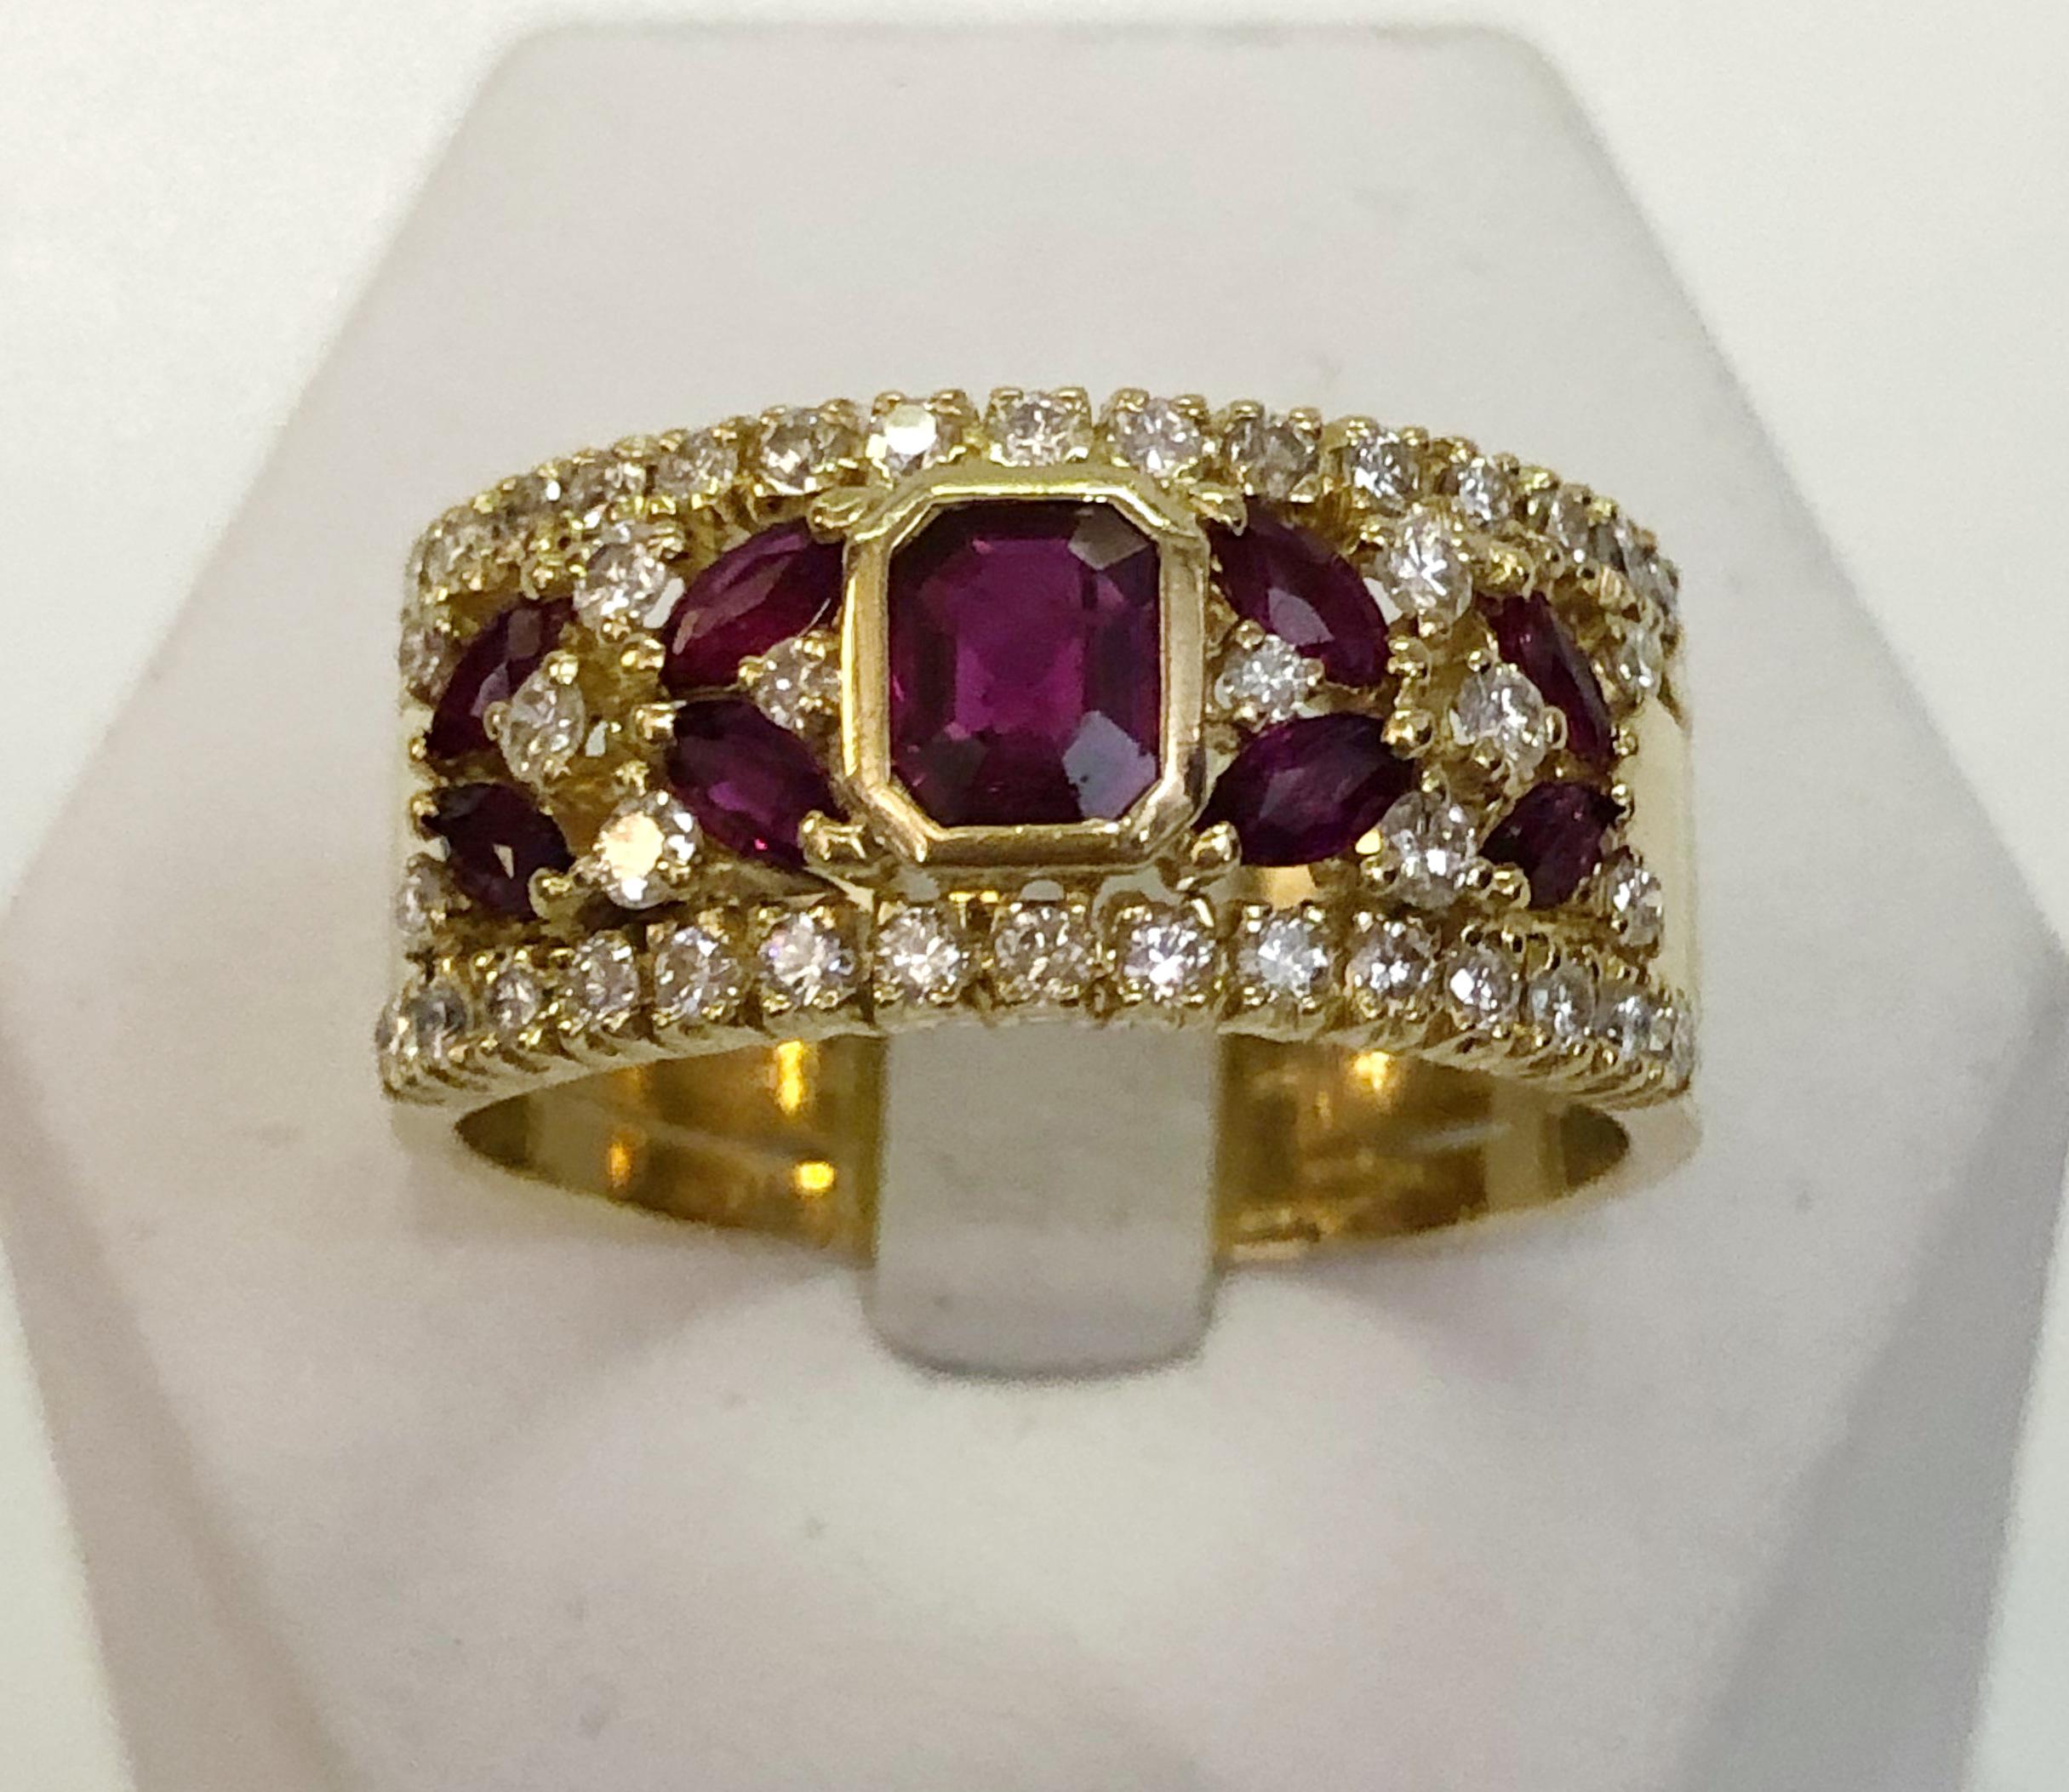 18 karat yellow gold band ring with rubies for a total of 0.4 karats and diamonds for a total of 0.3 karats / Italy 1950s
Ring size US 10.25